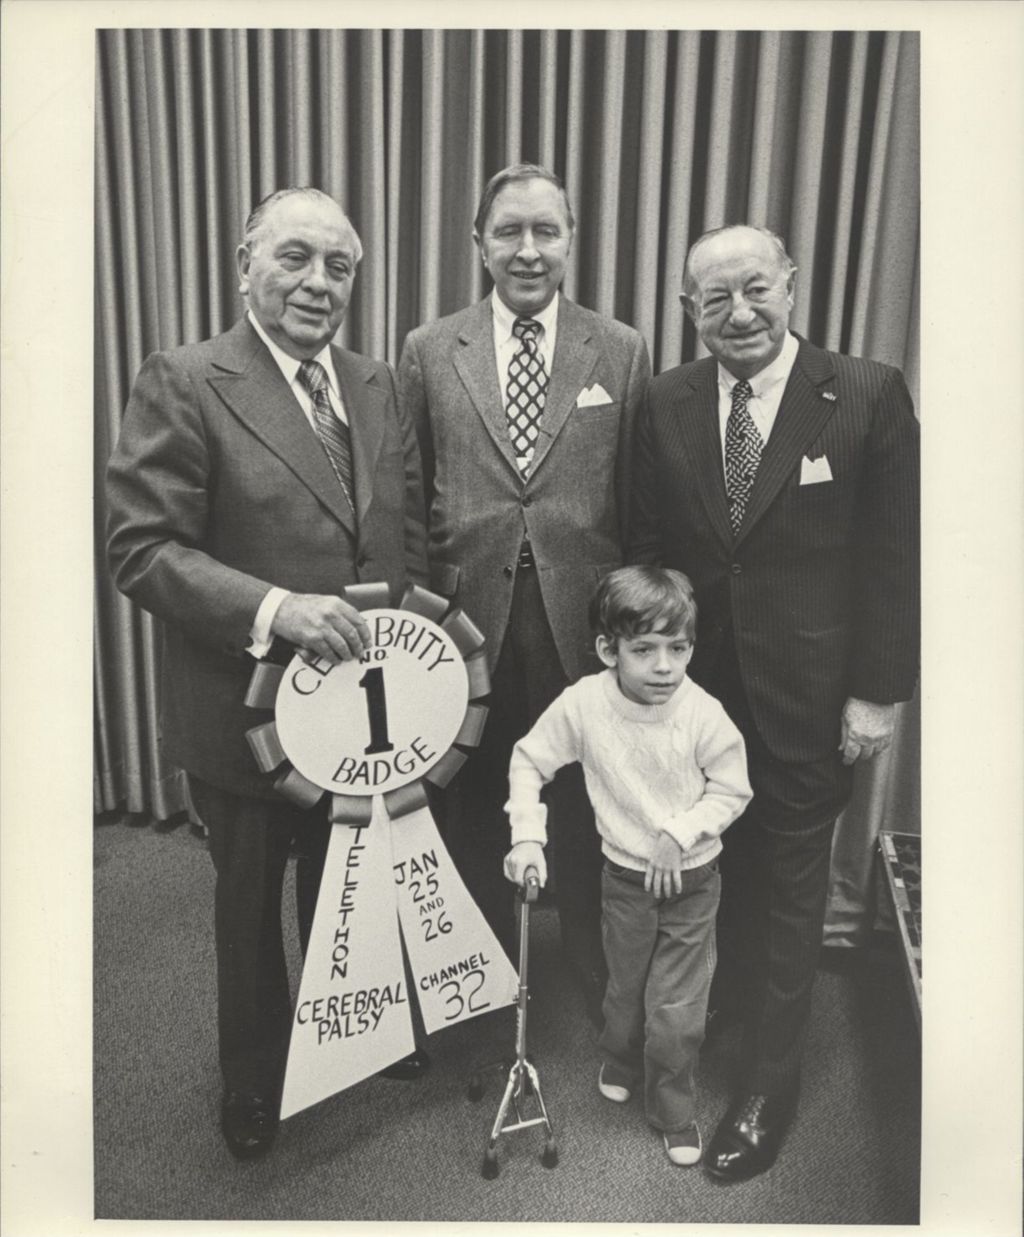 Richard J. Daley with three others at Cerebral Palsy telethon event